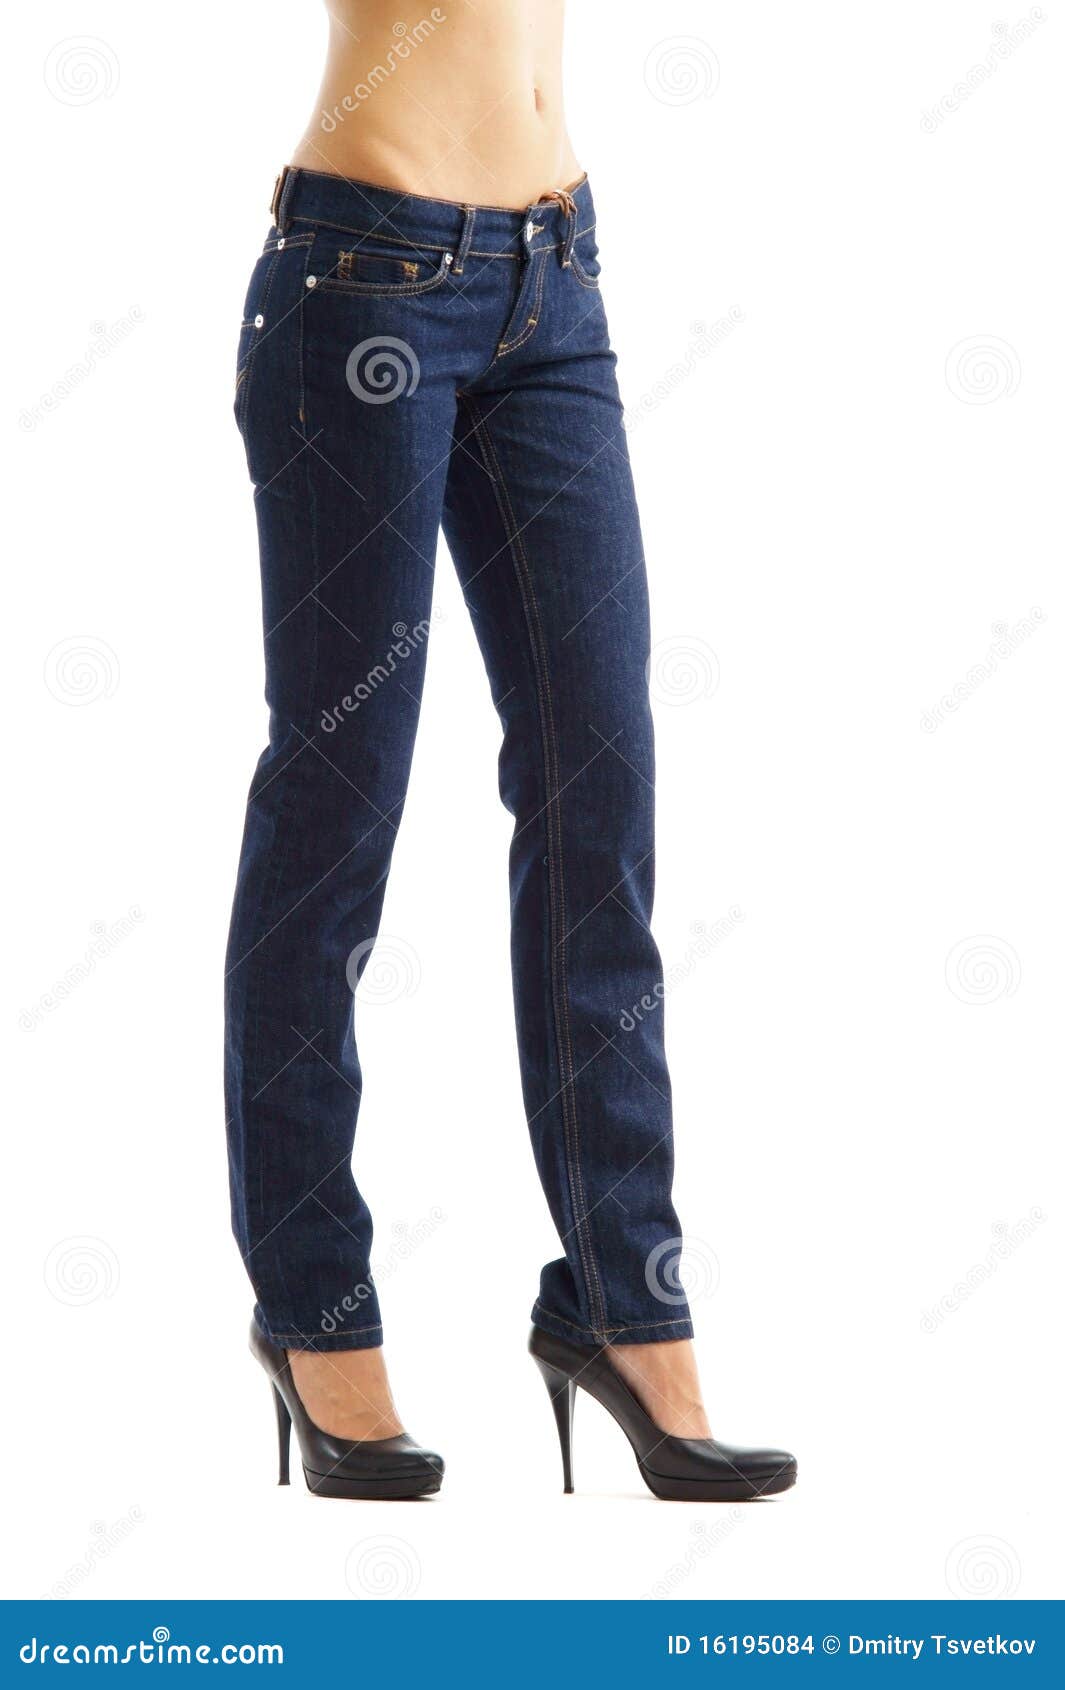 Woman Legs In Blue Jeans Stock Images - Image: 16195084